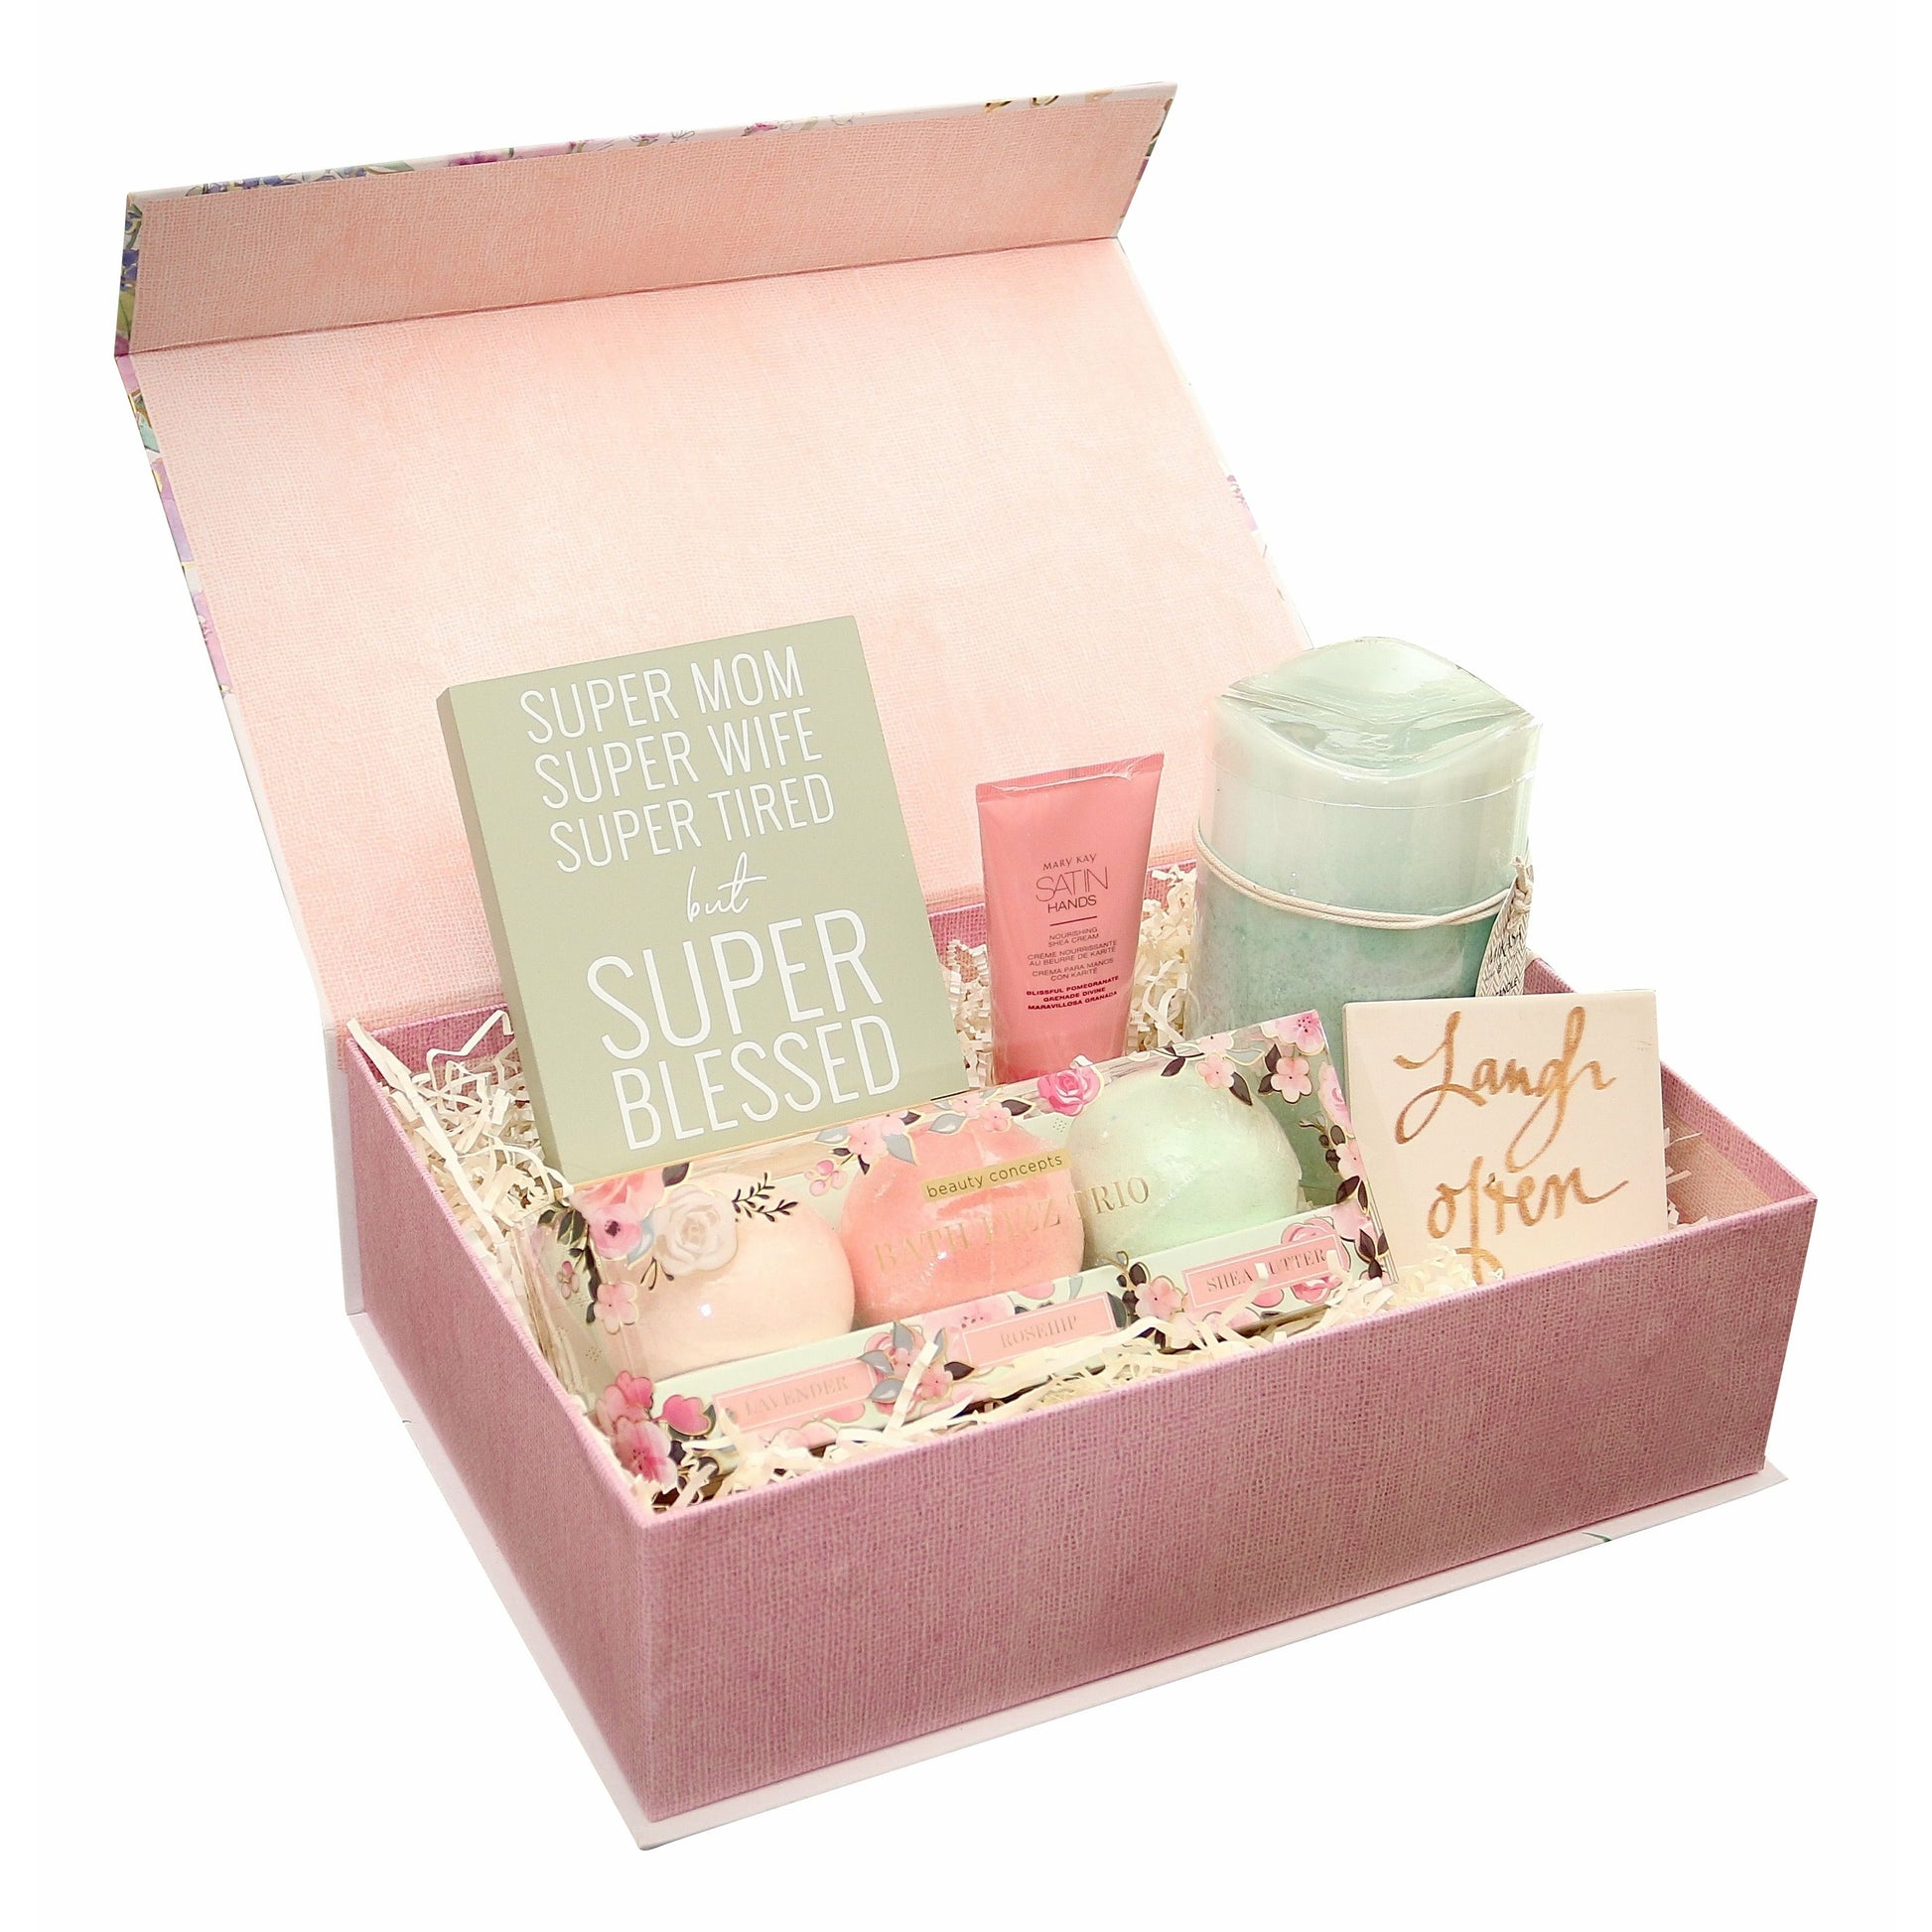 Super Blessed Mother’s Day Gift Box - DJW Custom Baskets & Beyond